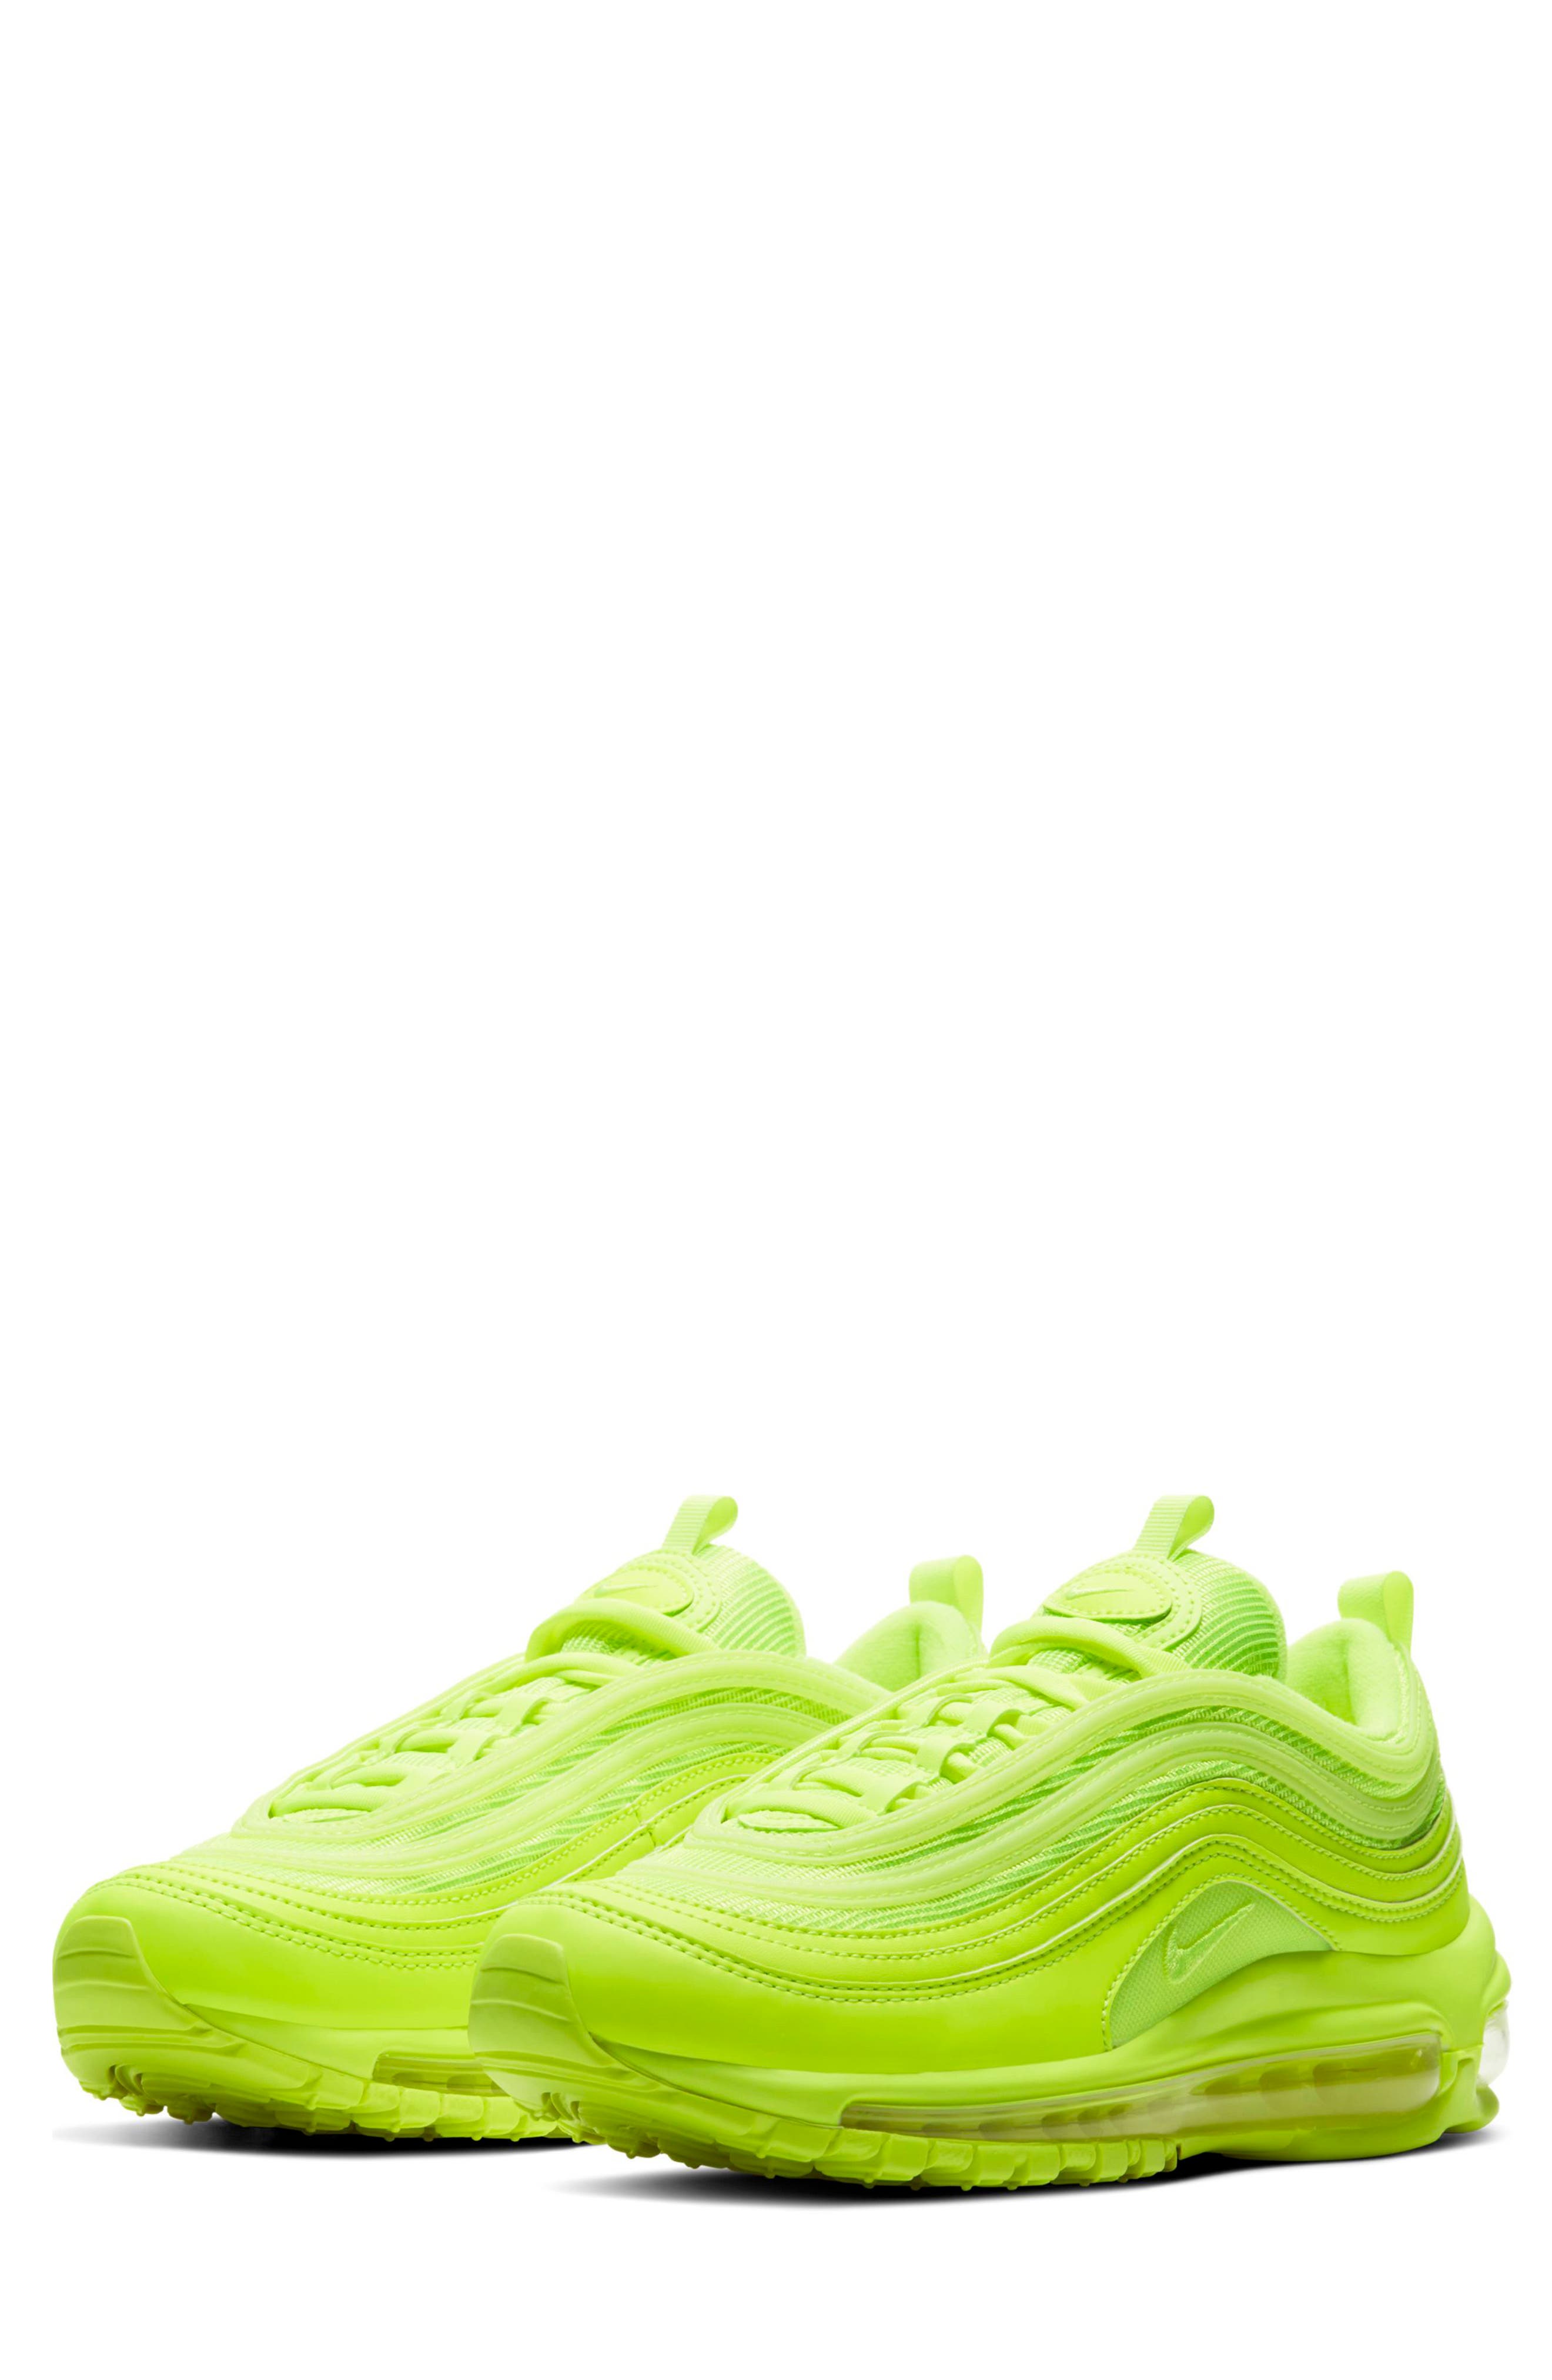 UPC 194274400663 product image for Women's Nike Air Max 97 Sneaker, Size 7.5 M - Yellow | upcitemdb.com